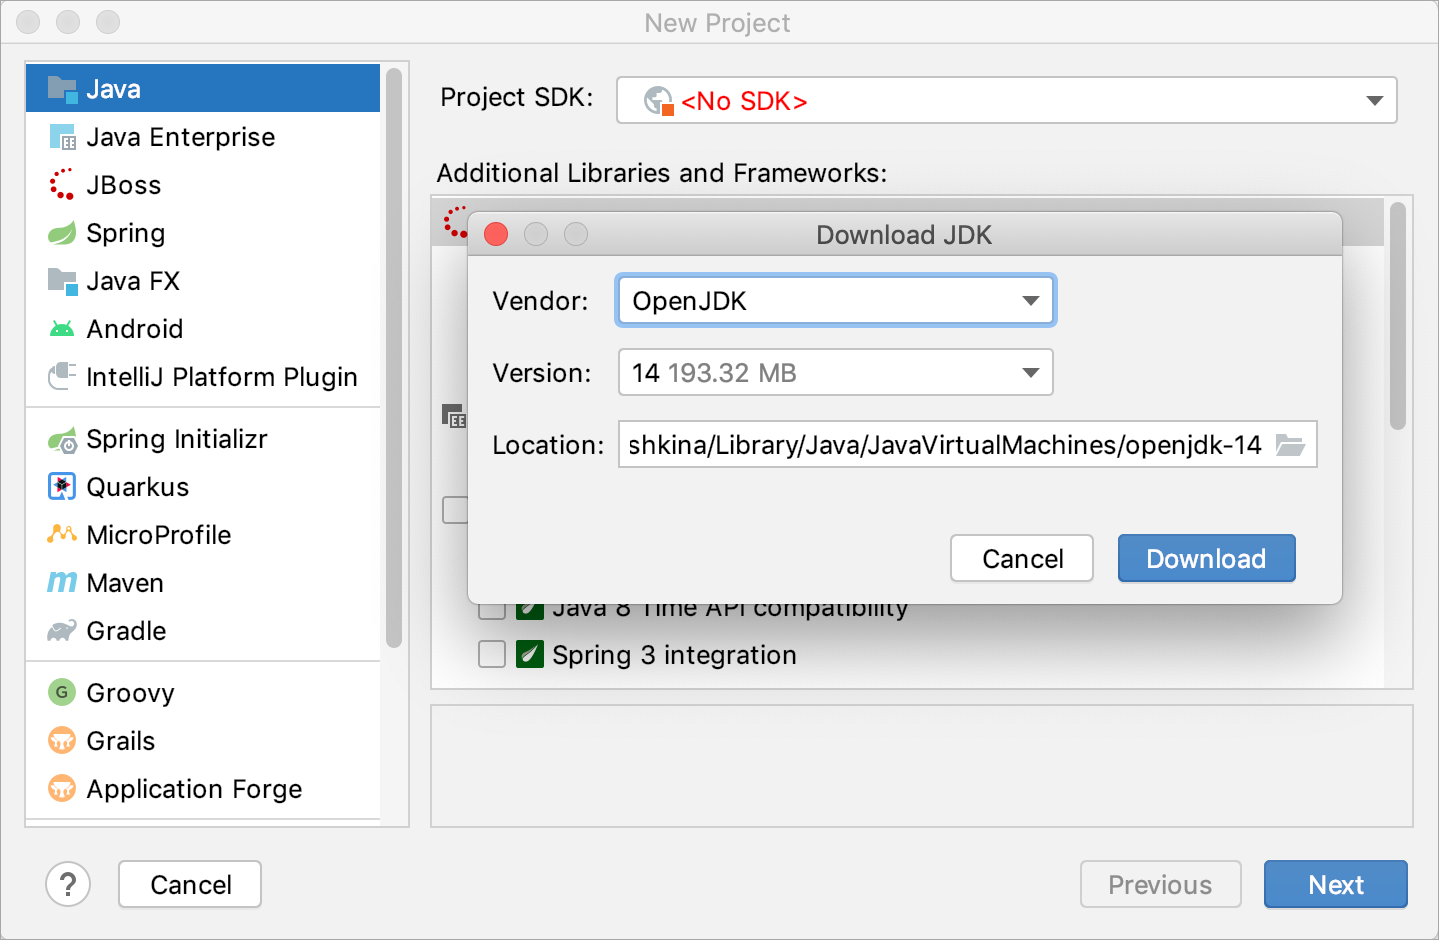 Downloading a JDK for the new project